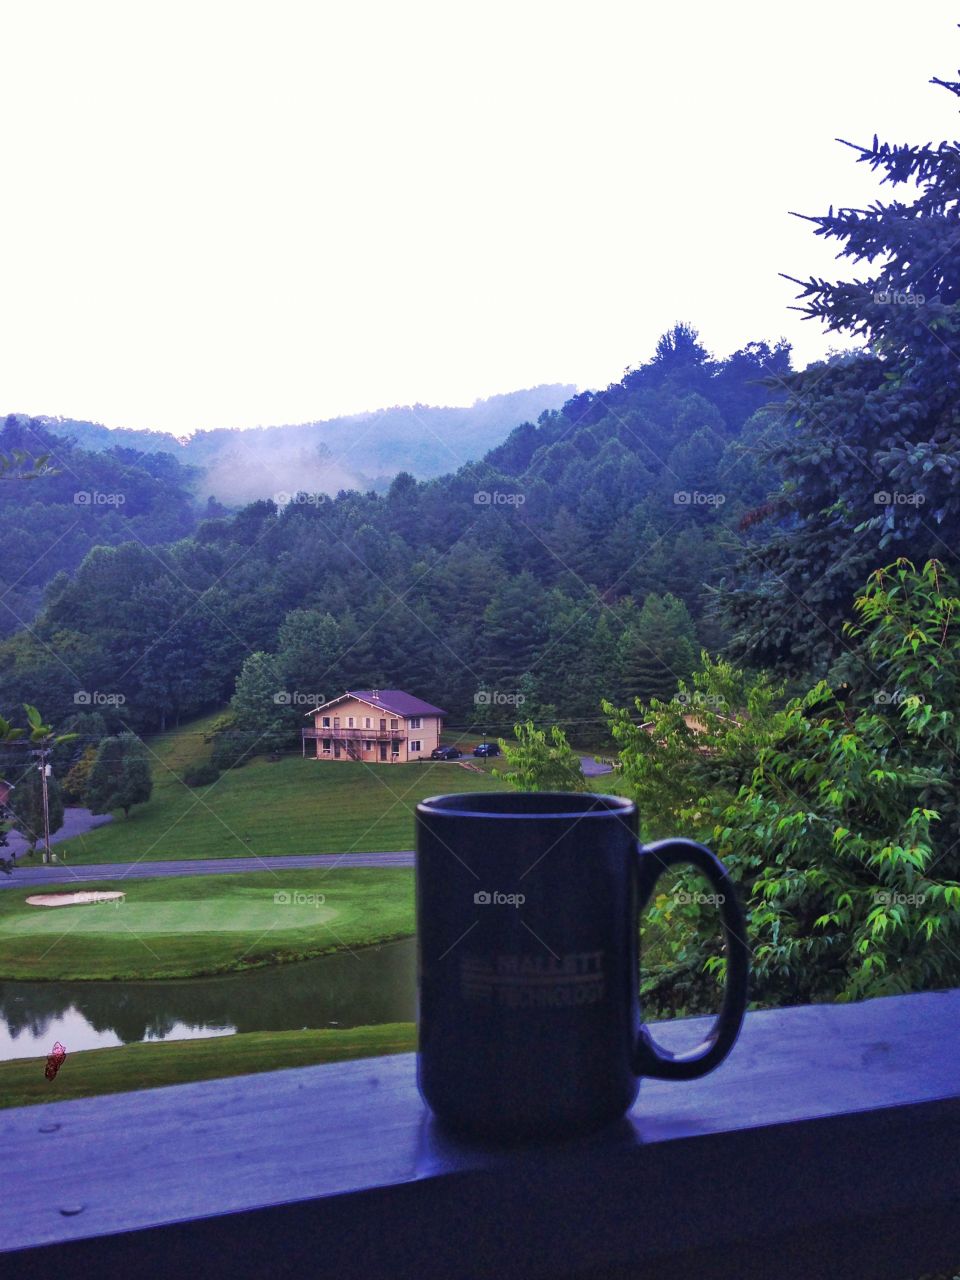 Smokey Mountains coffee. Having coffee on a chilly morning in the smokey mountains 